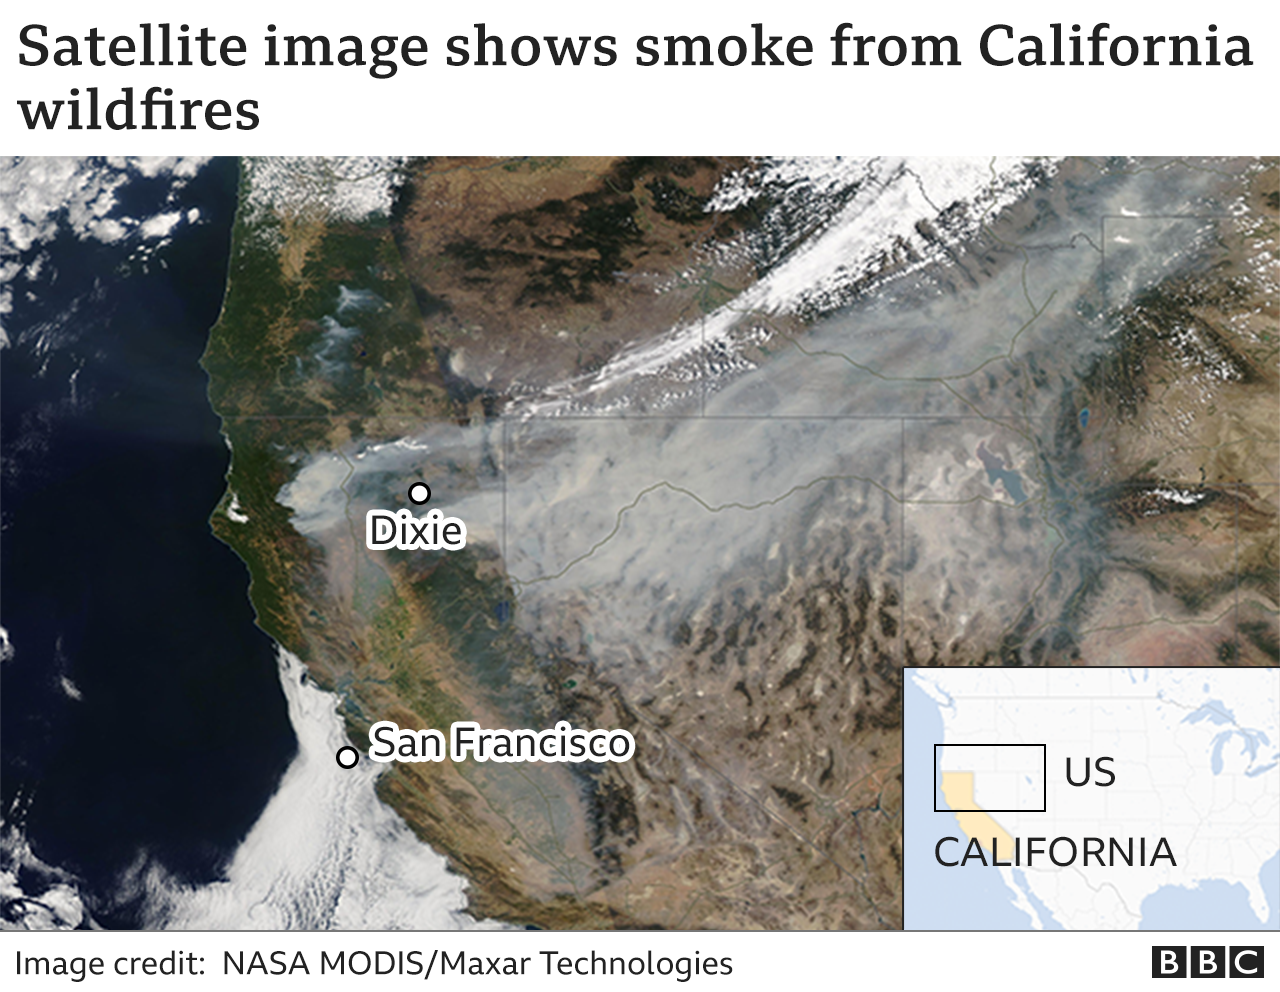 A satellite image of the fires